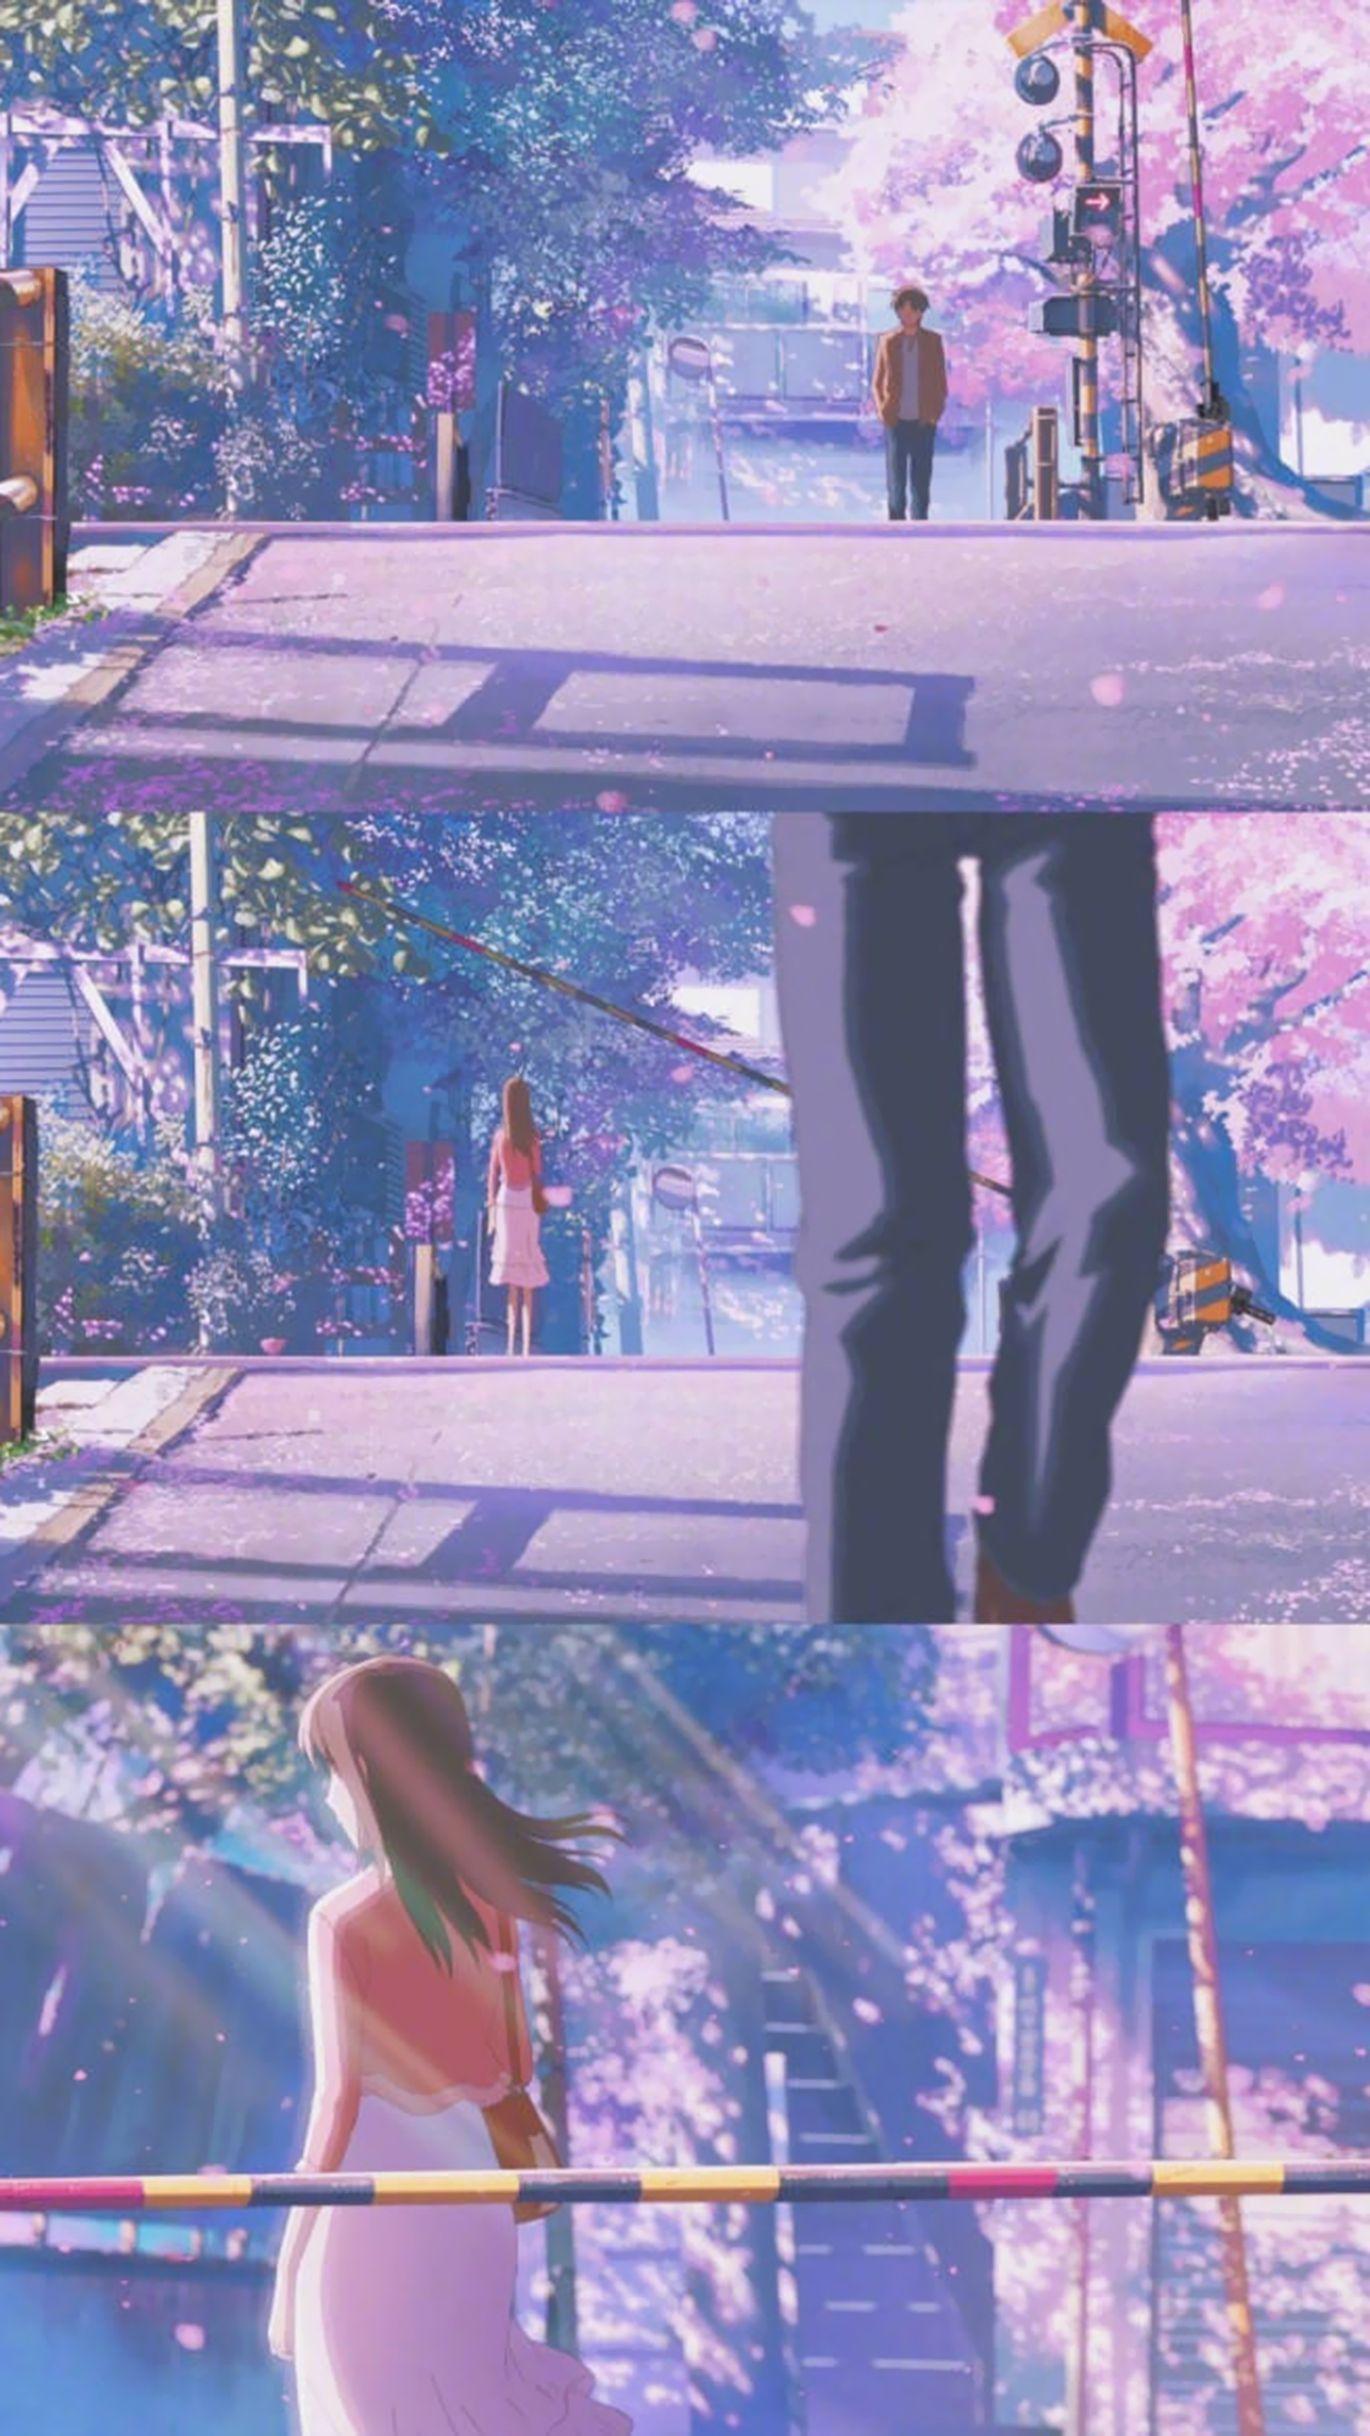 5 Centimeters Per Second Iphone Wallpapers Top Free 5 Centimeters Per Second Iphone Backgrounds Wallpaperaccess